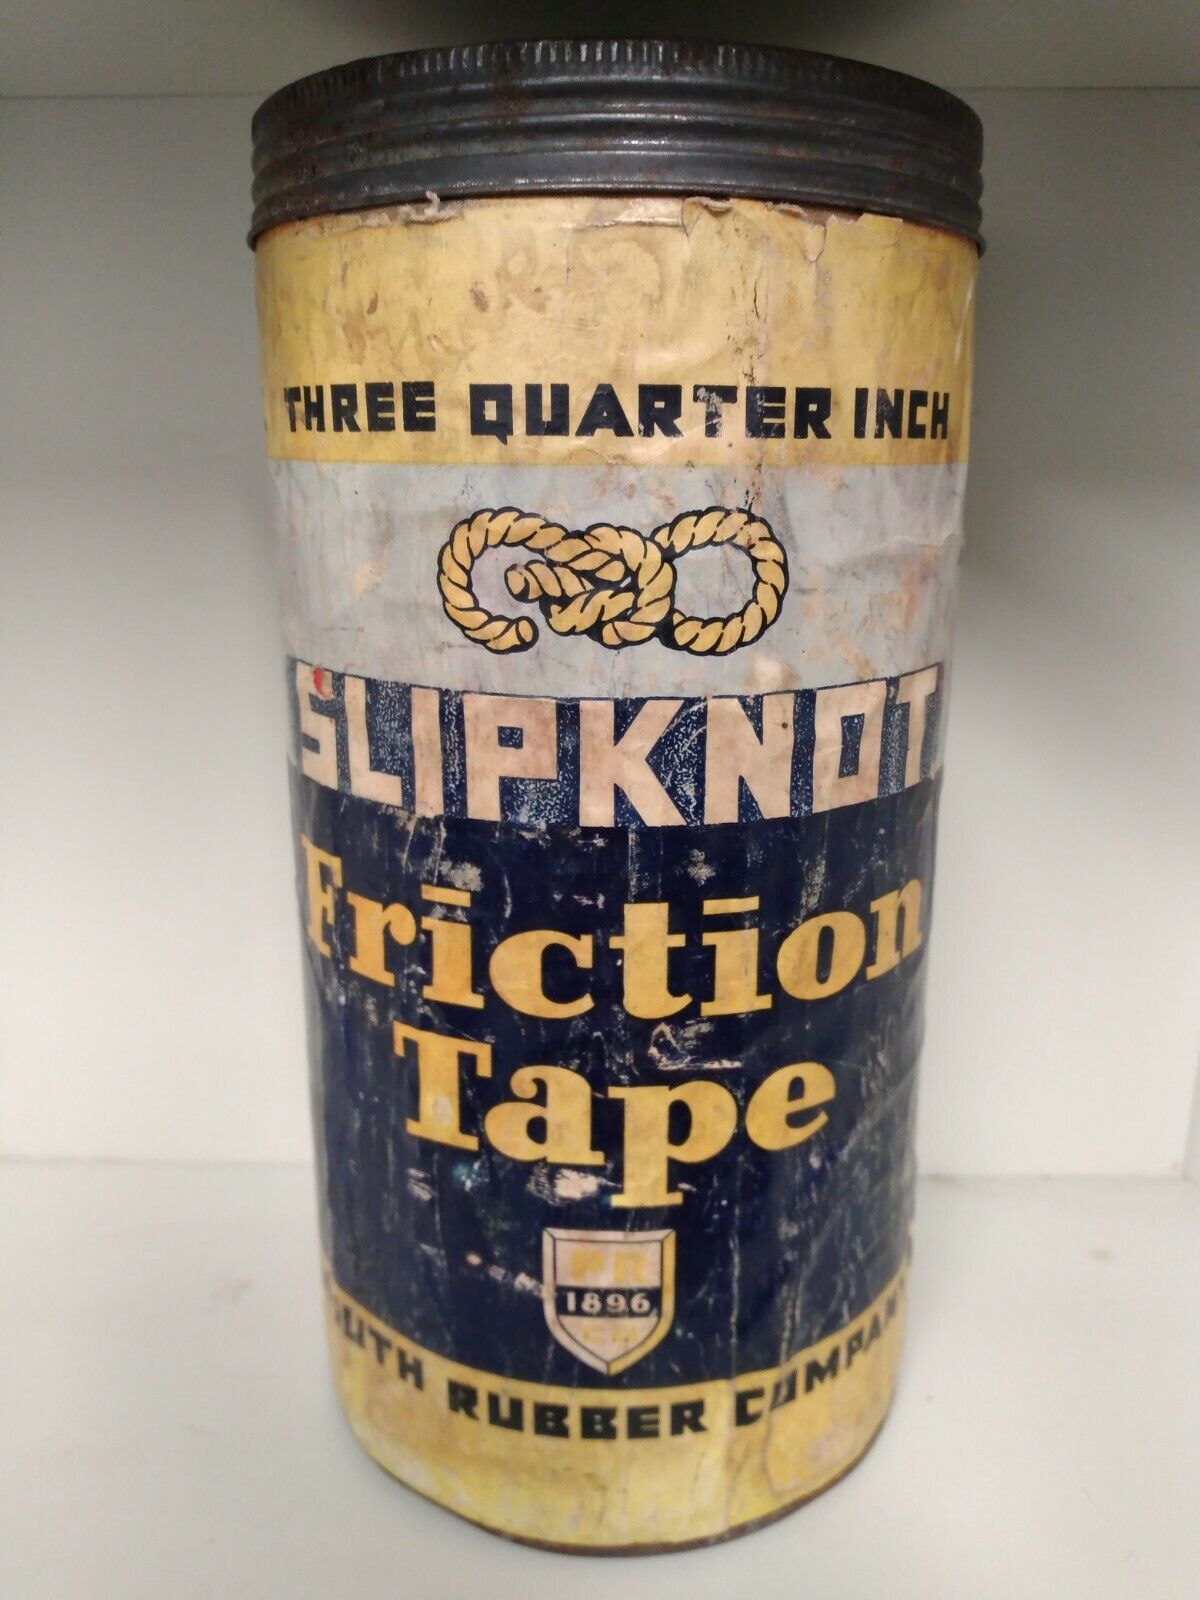 Vintage Slipknot Friction Tape Tin by Plymouth Rubber Company - Canton MA